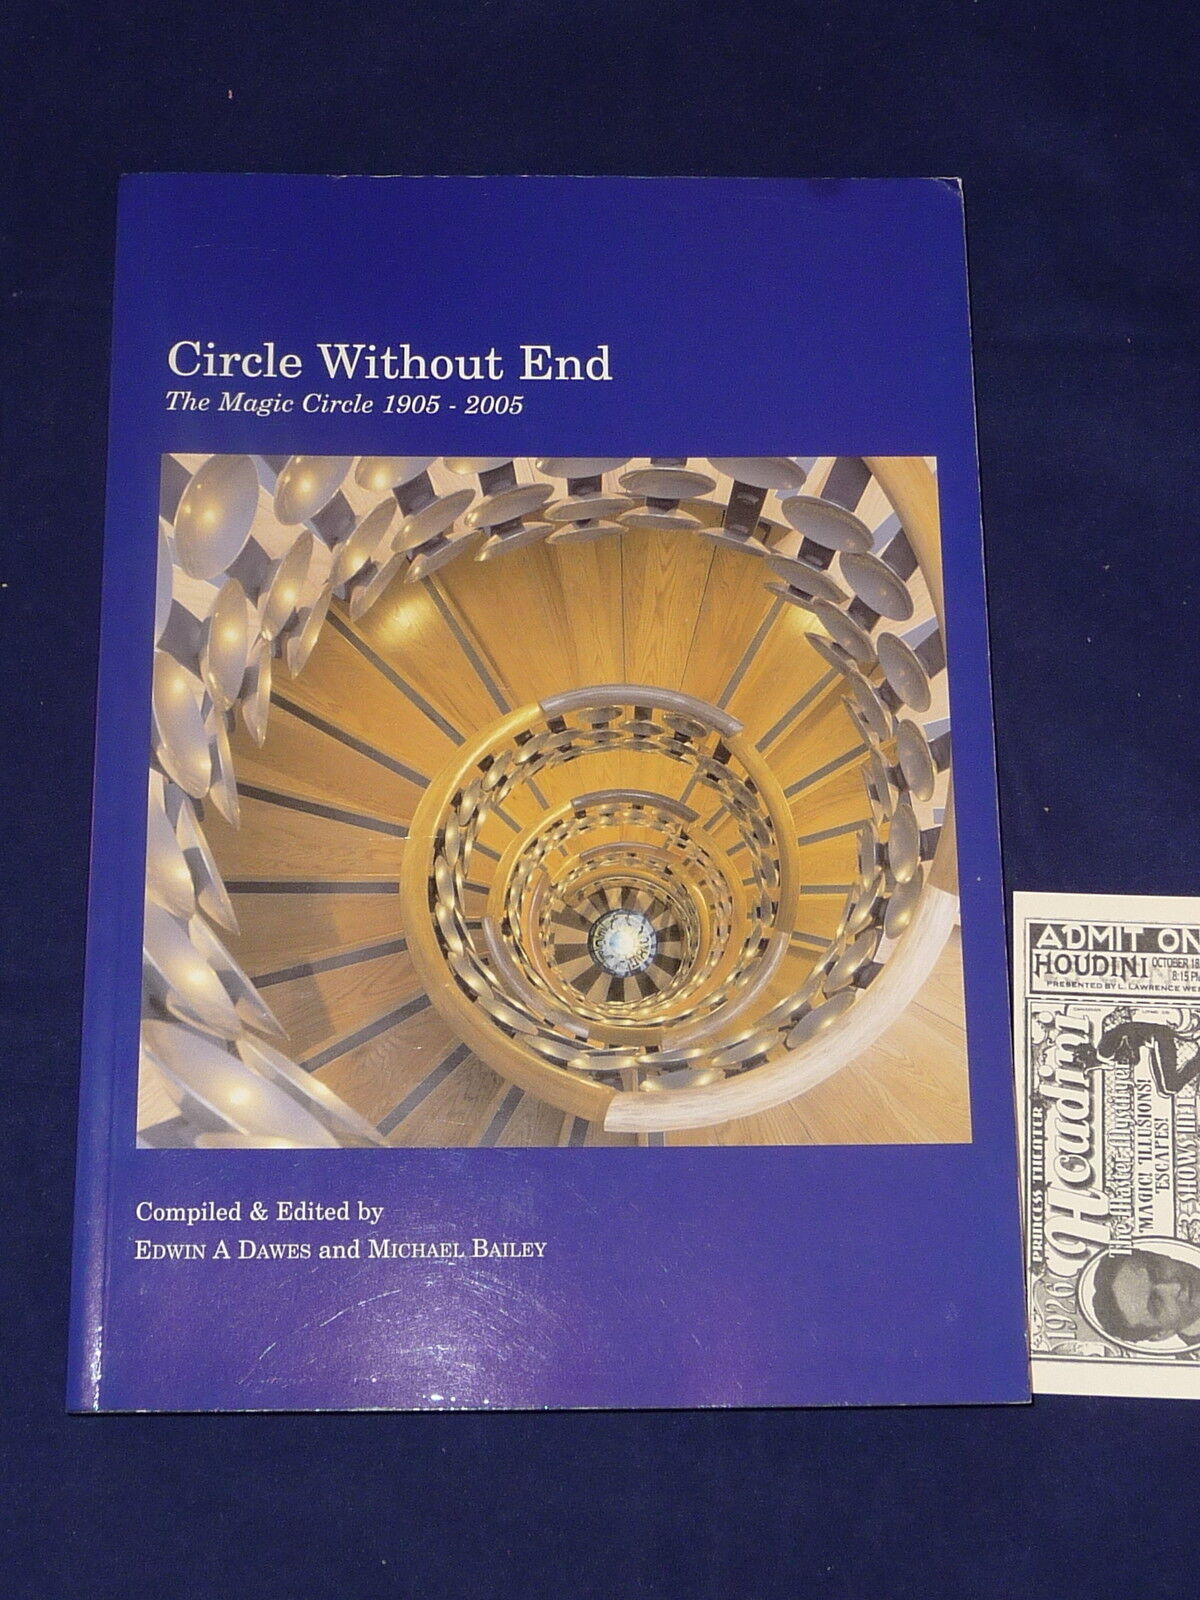 THE MAGIC CIRCLE 1905-2005 WITHOUT END MAGIC BOOK New Sealed Edwin Dawes London